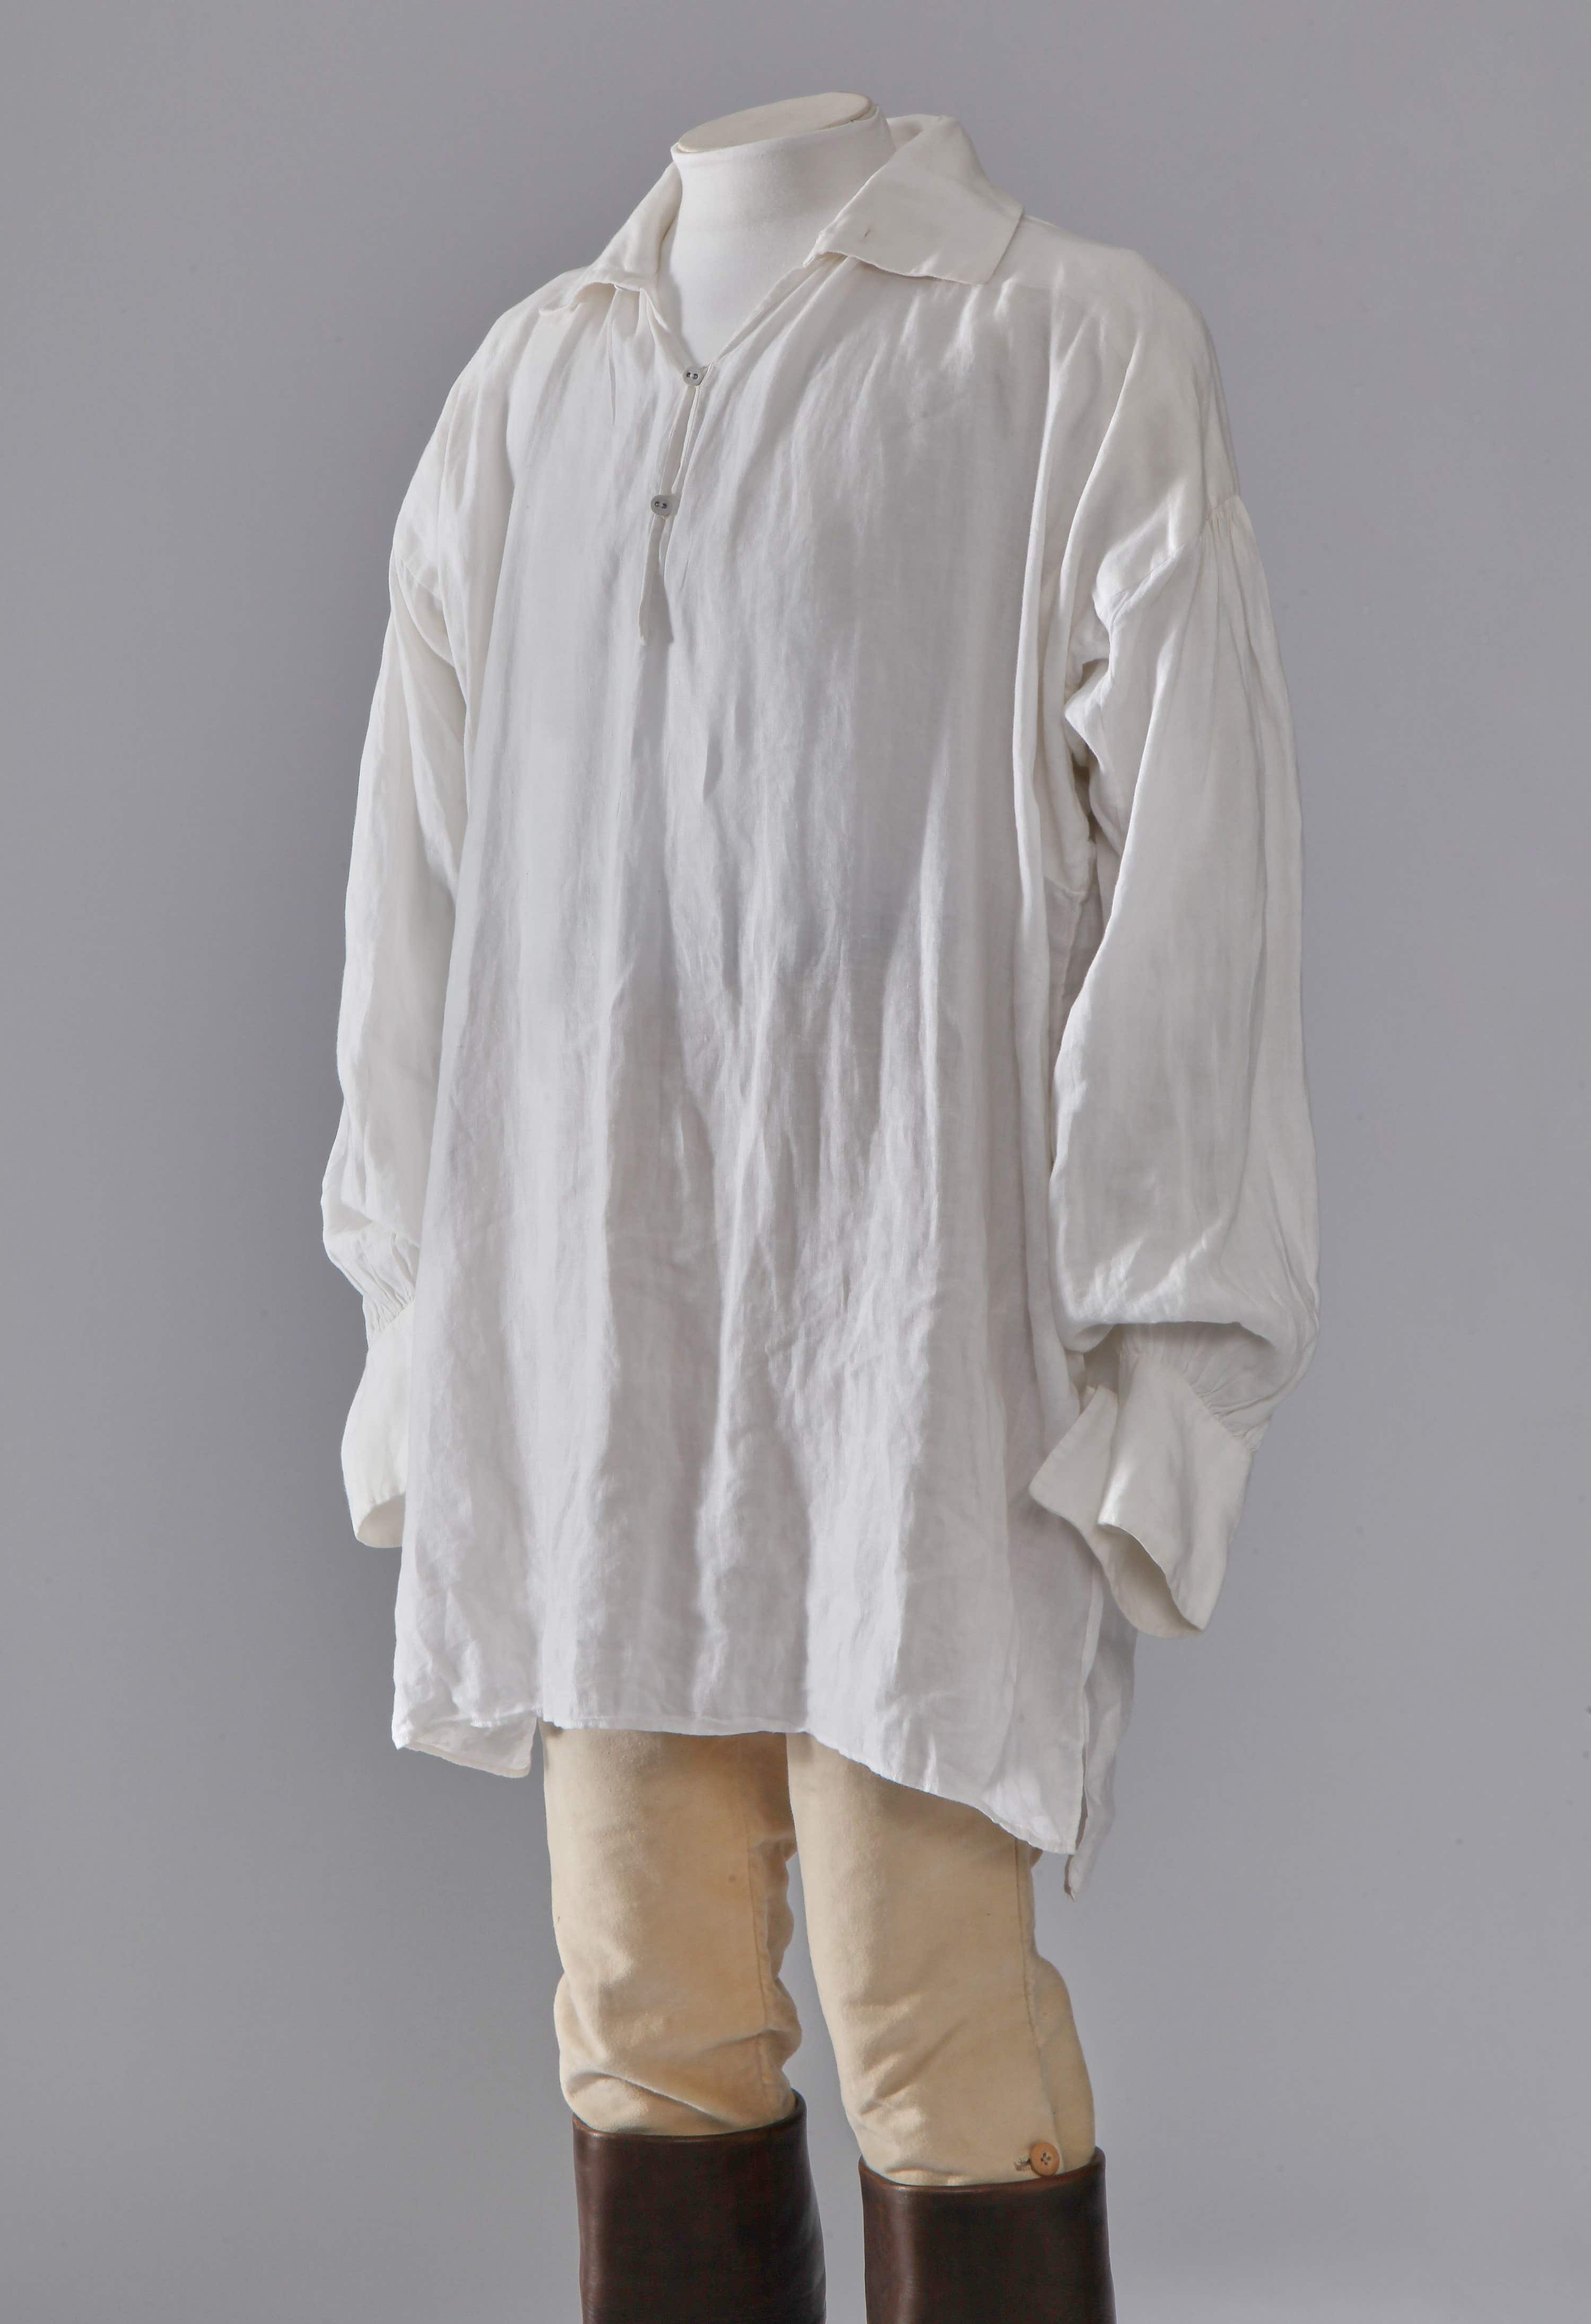 A shirt worn by Colin Firth when he swims in a lake during the TV series adaption of Jane Austen’s classic novel Pride And Prejudice.